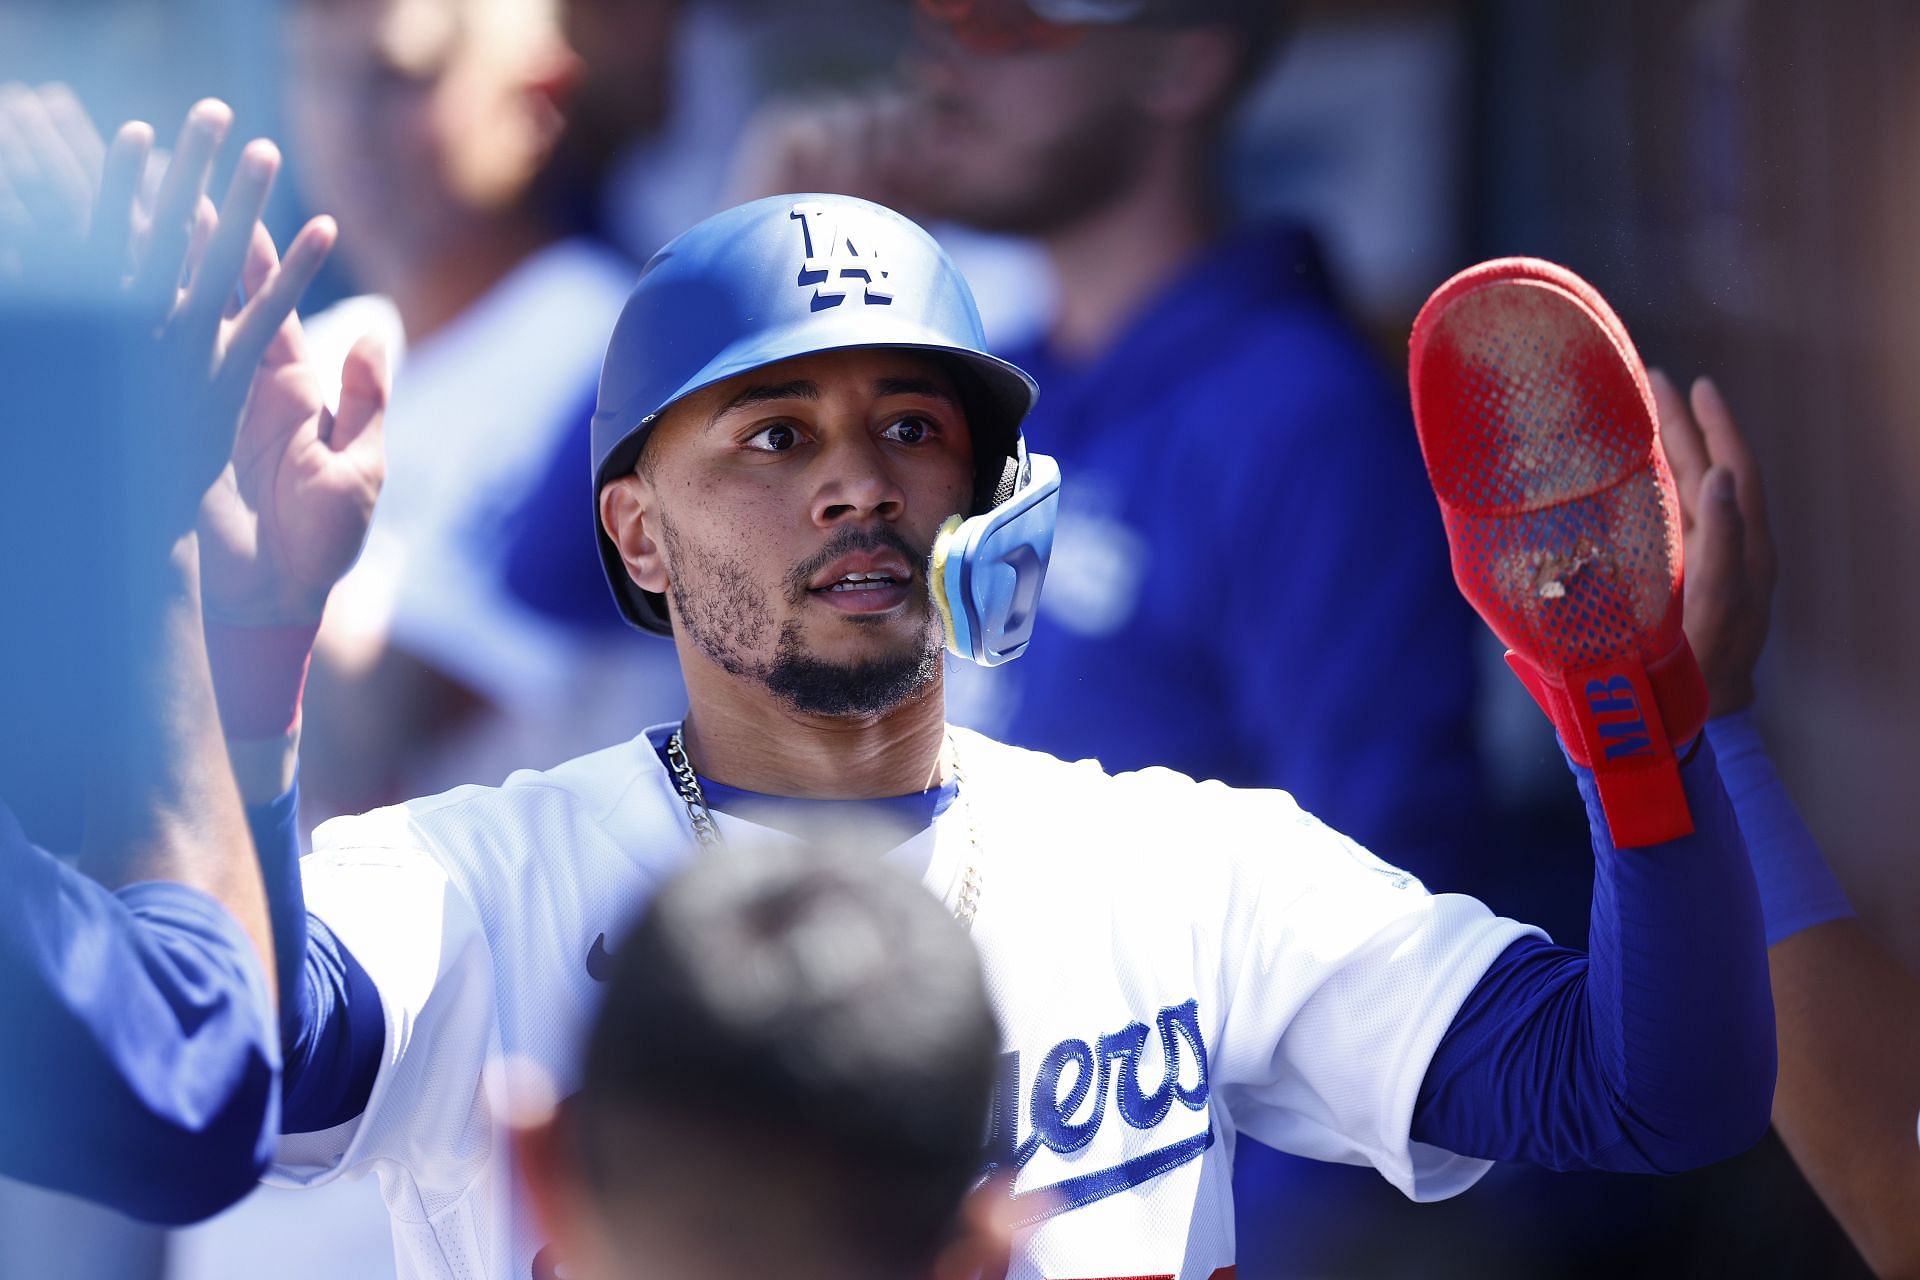 Mookie Betts leads the Dodgers with 20 home runs.